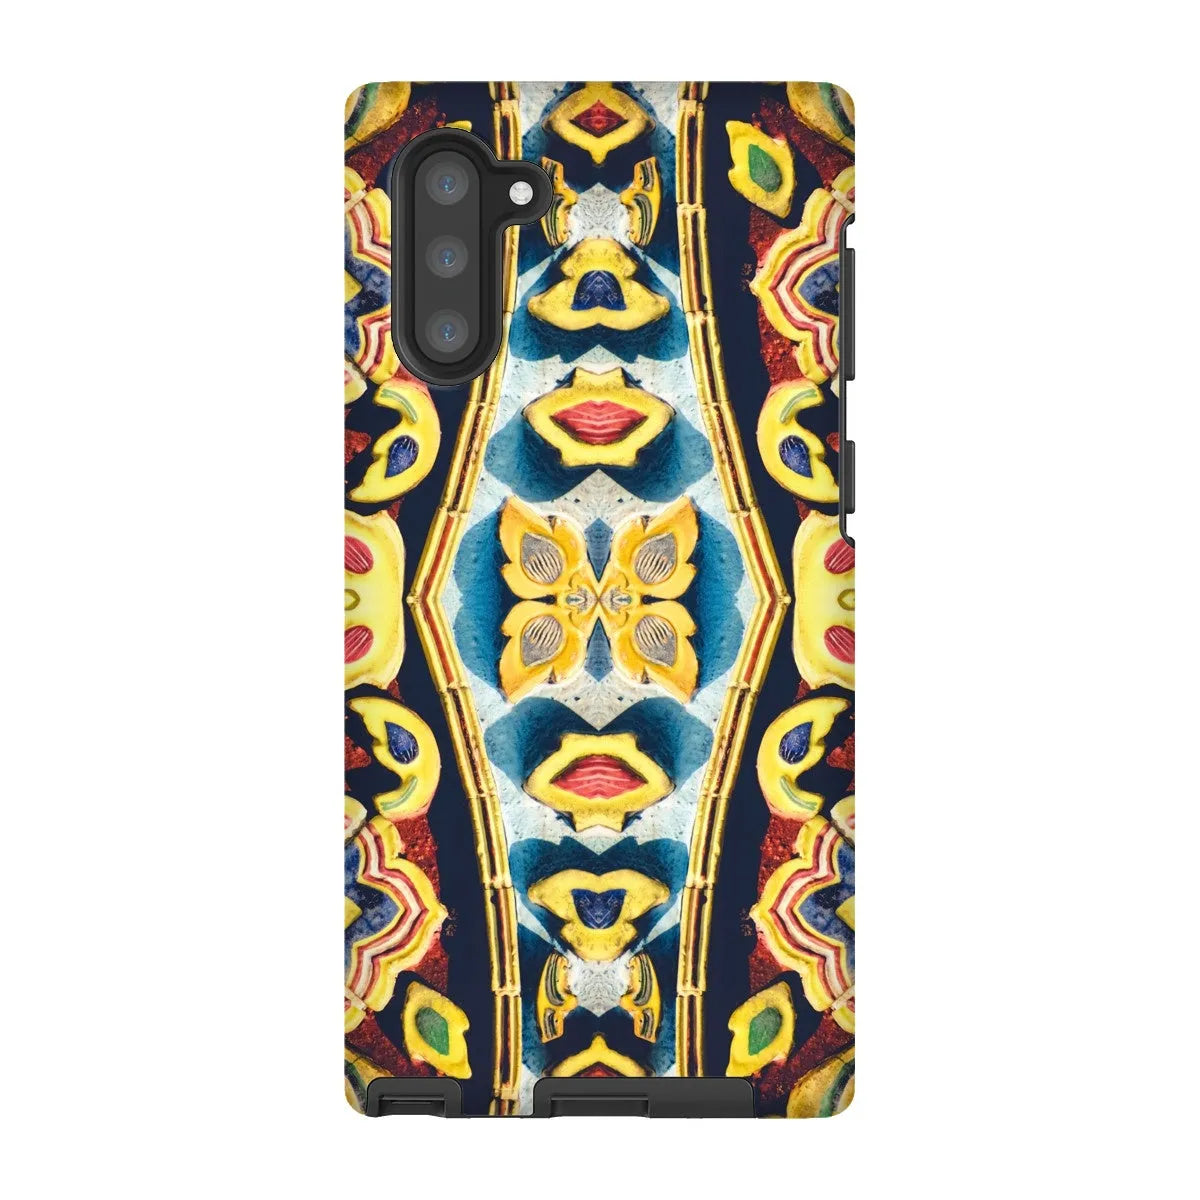 Masala Thai Aesthetic Mosaic Pattern Art Phone Case - Samsung Galaxy Note 10 / Matte - Mobile Phone Cases - Aesthetic